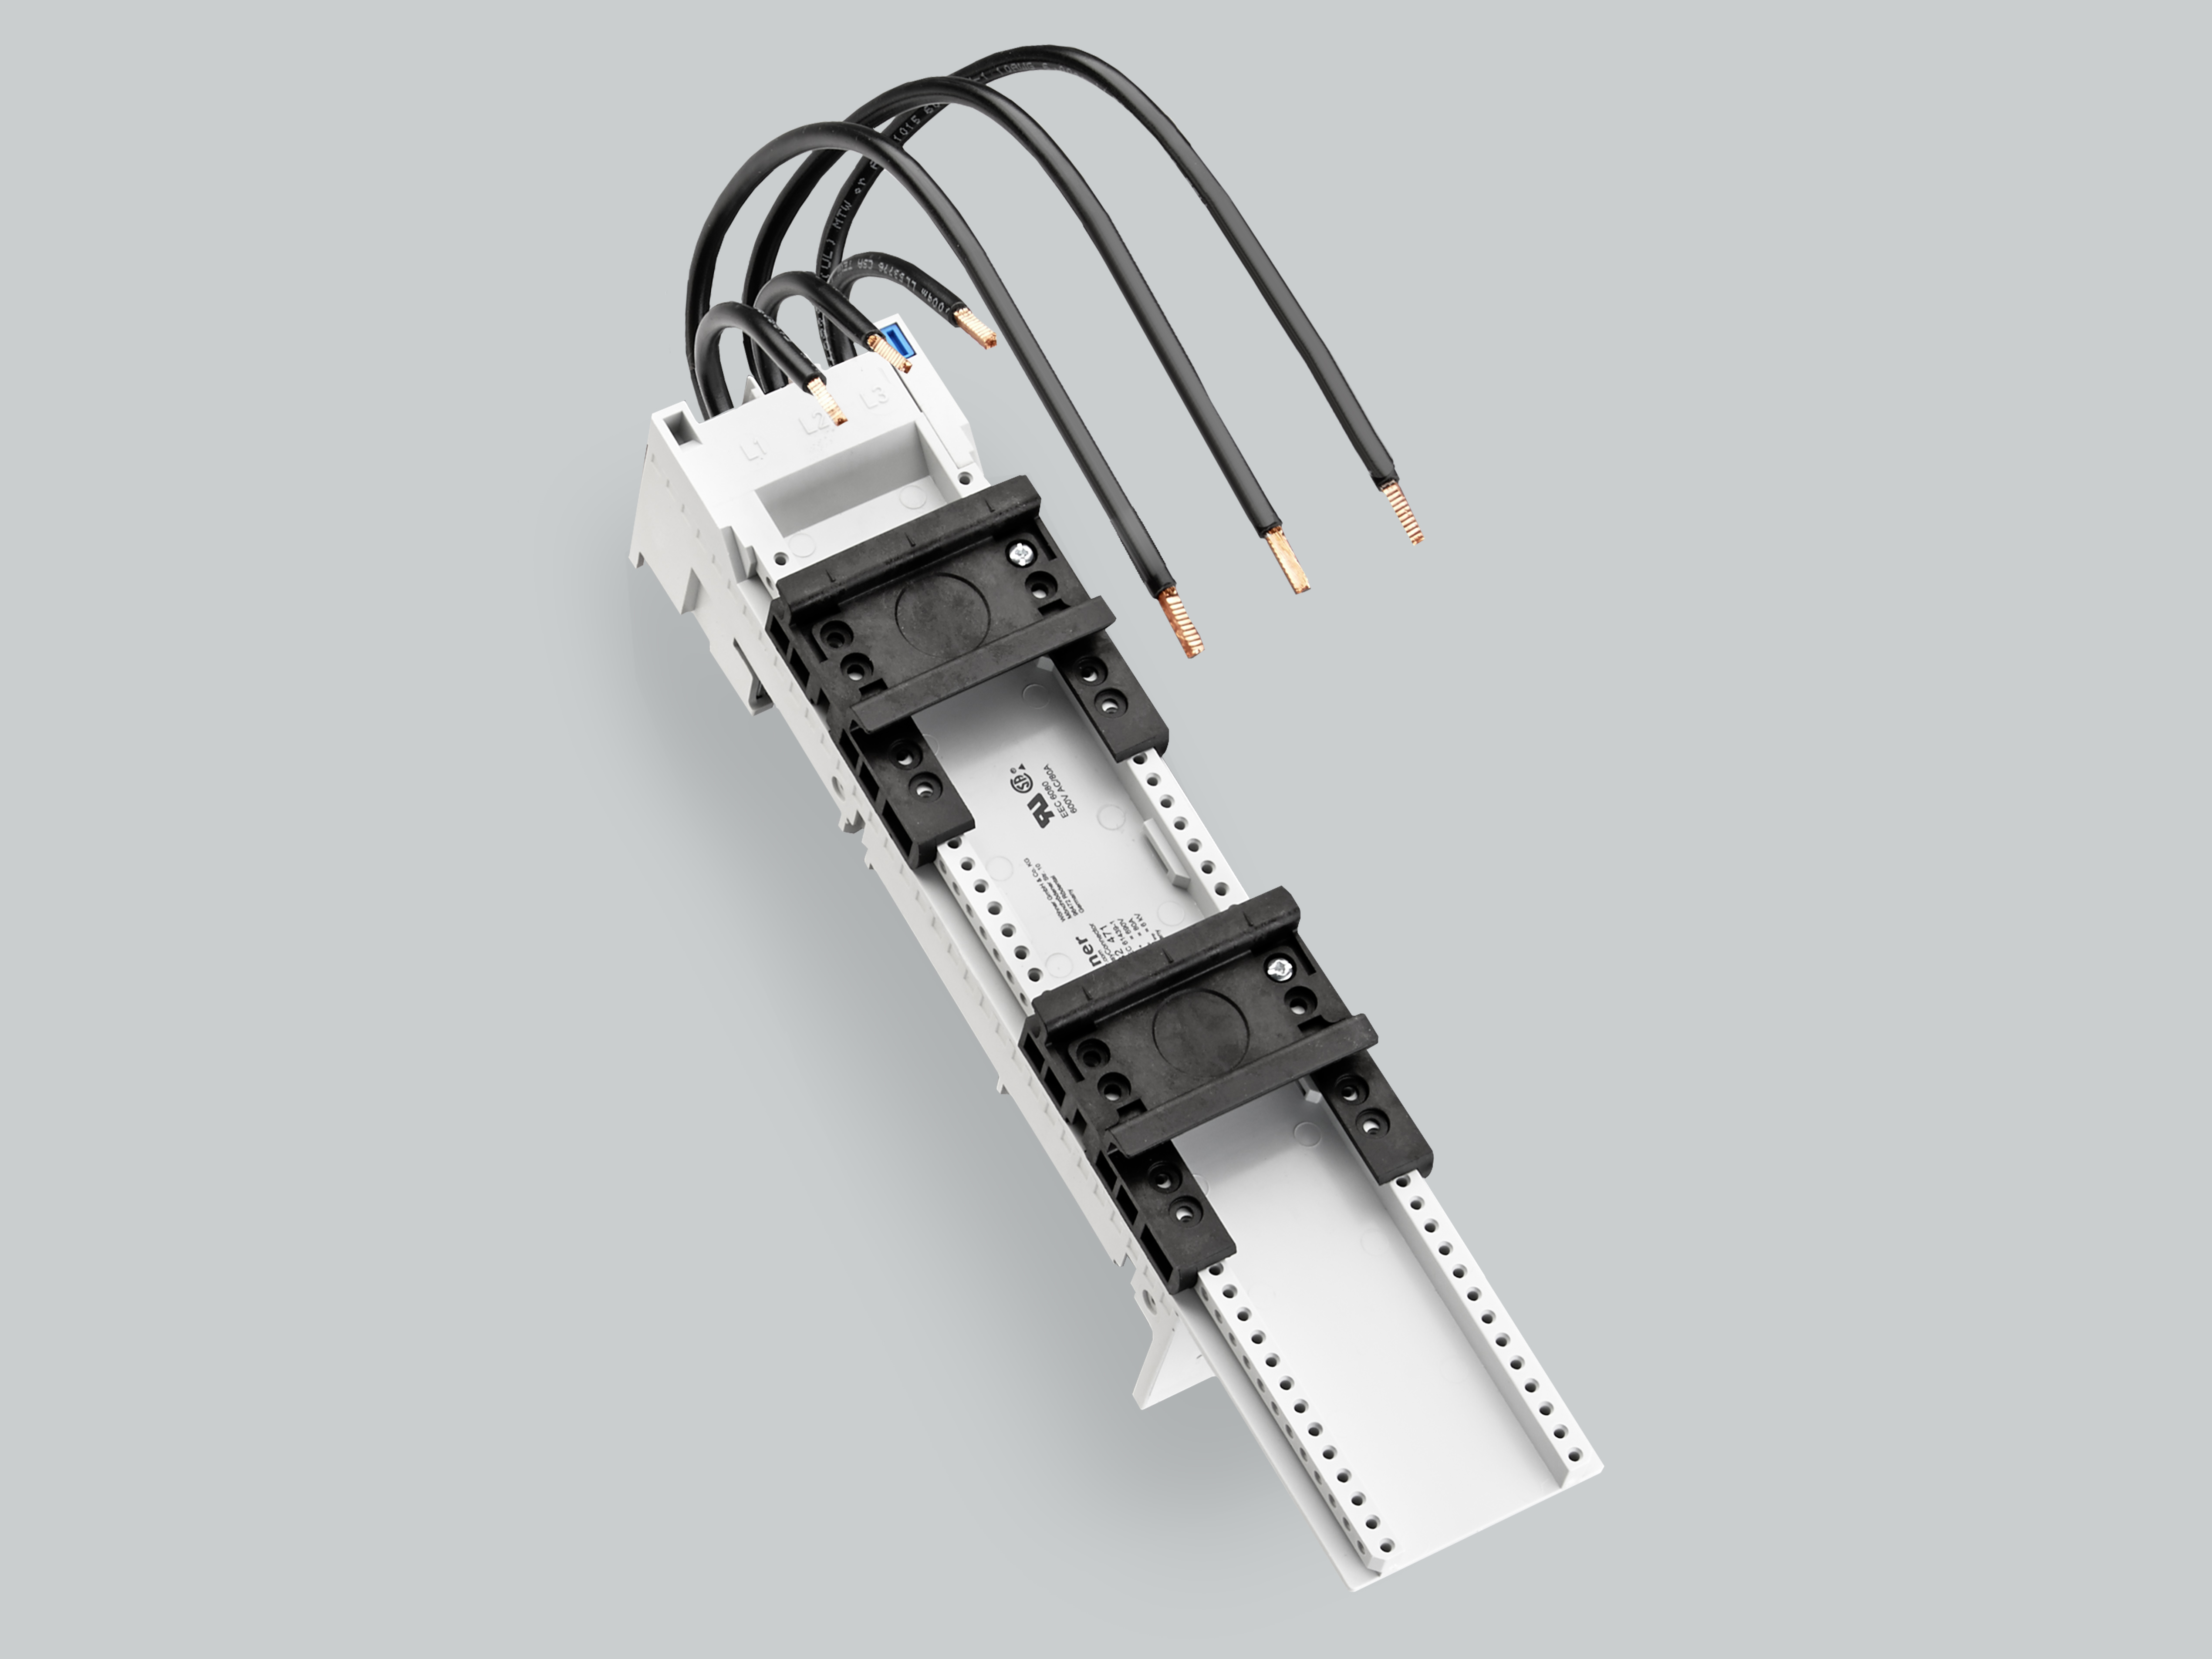 Universal adapters 80 A, 3-pole, with twin cables